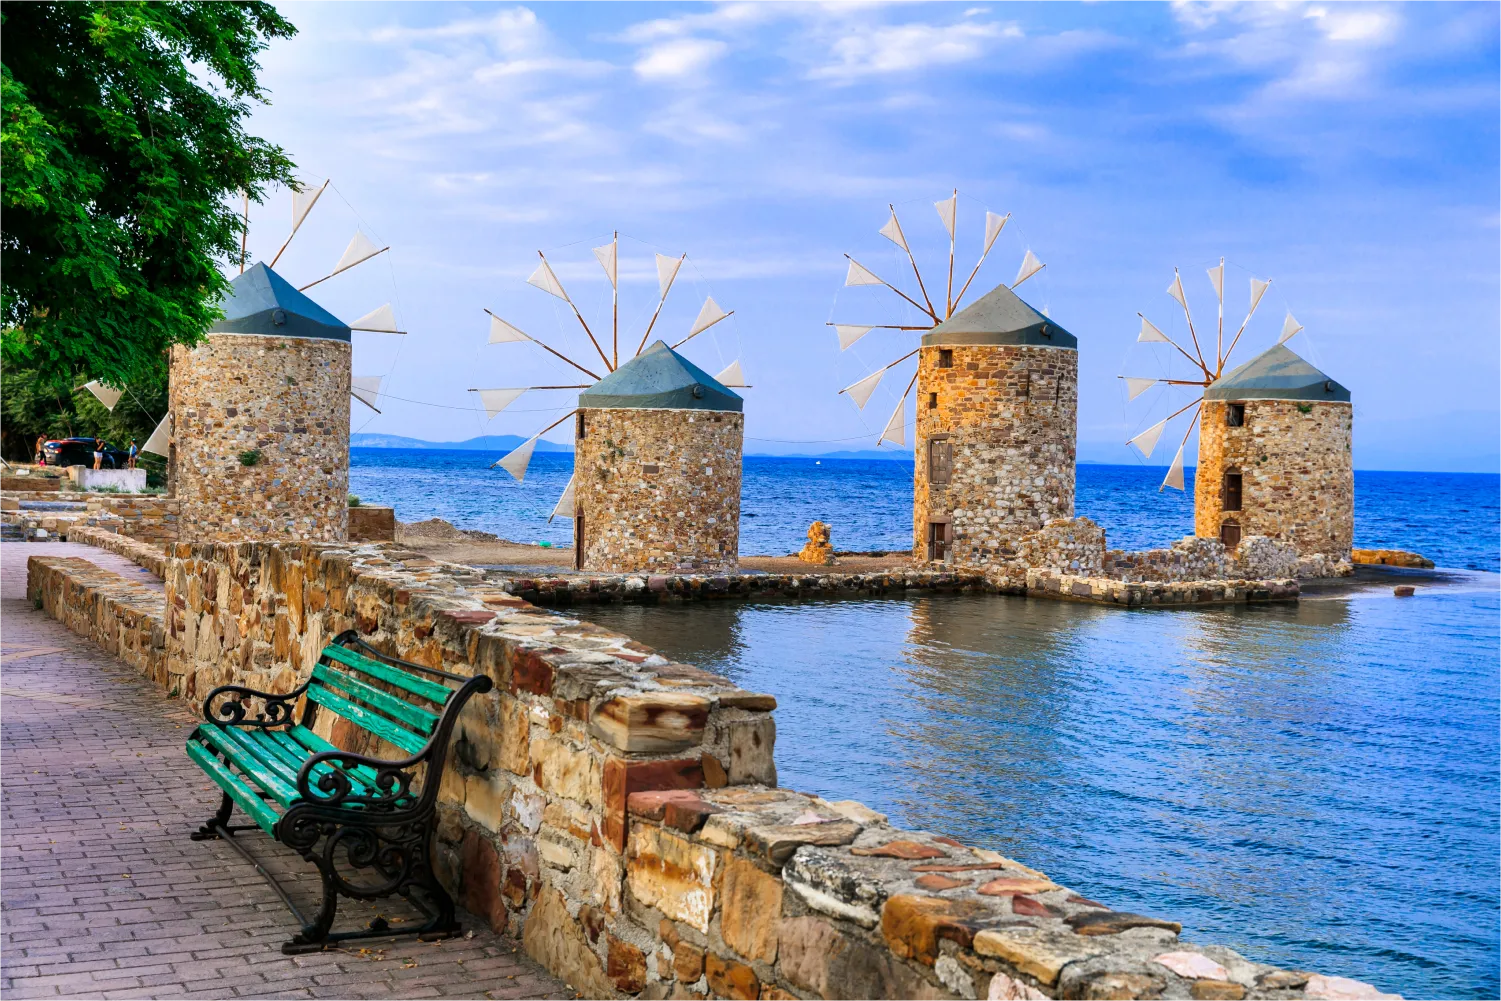 Series of Old Windmills Over the Sea In Chios Island